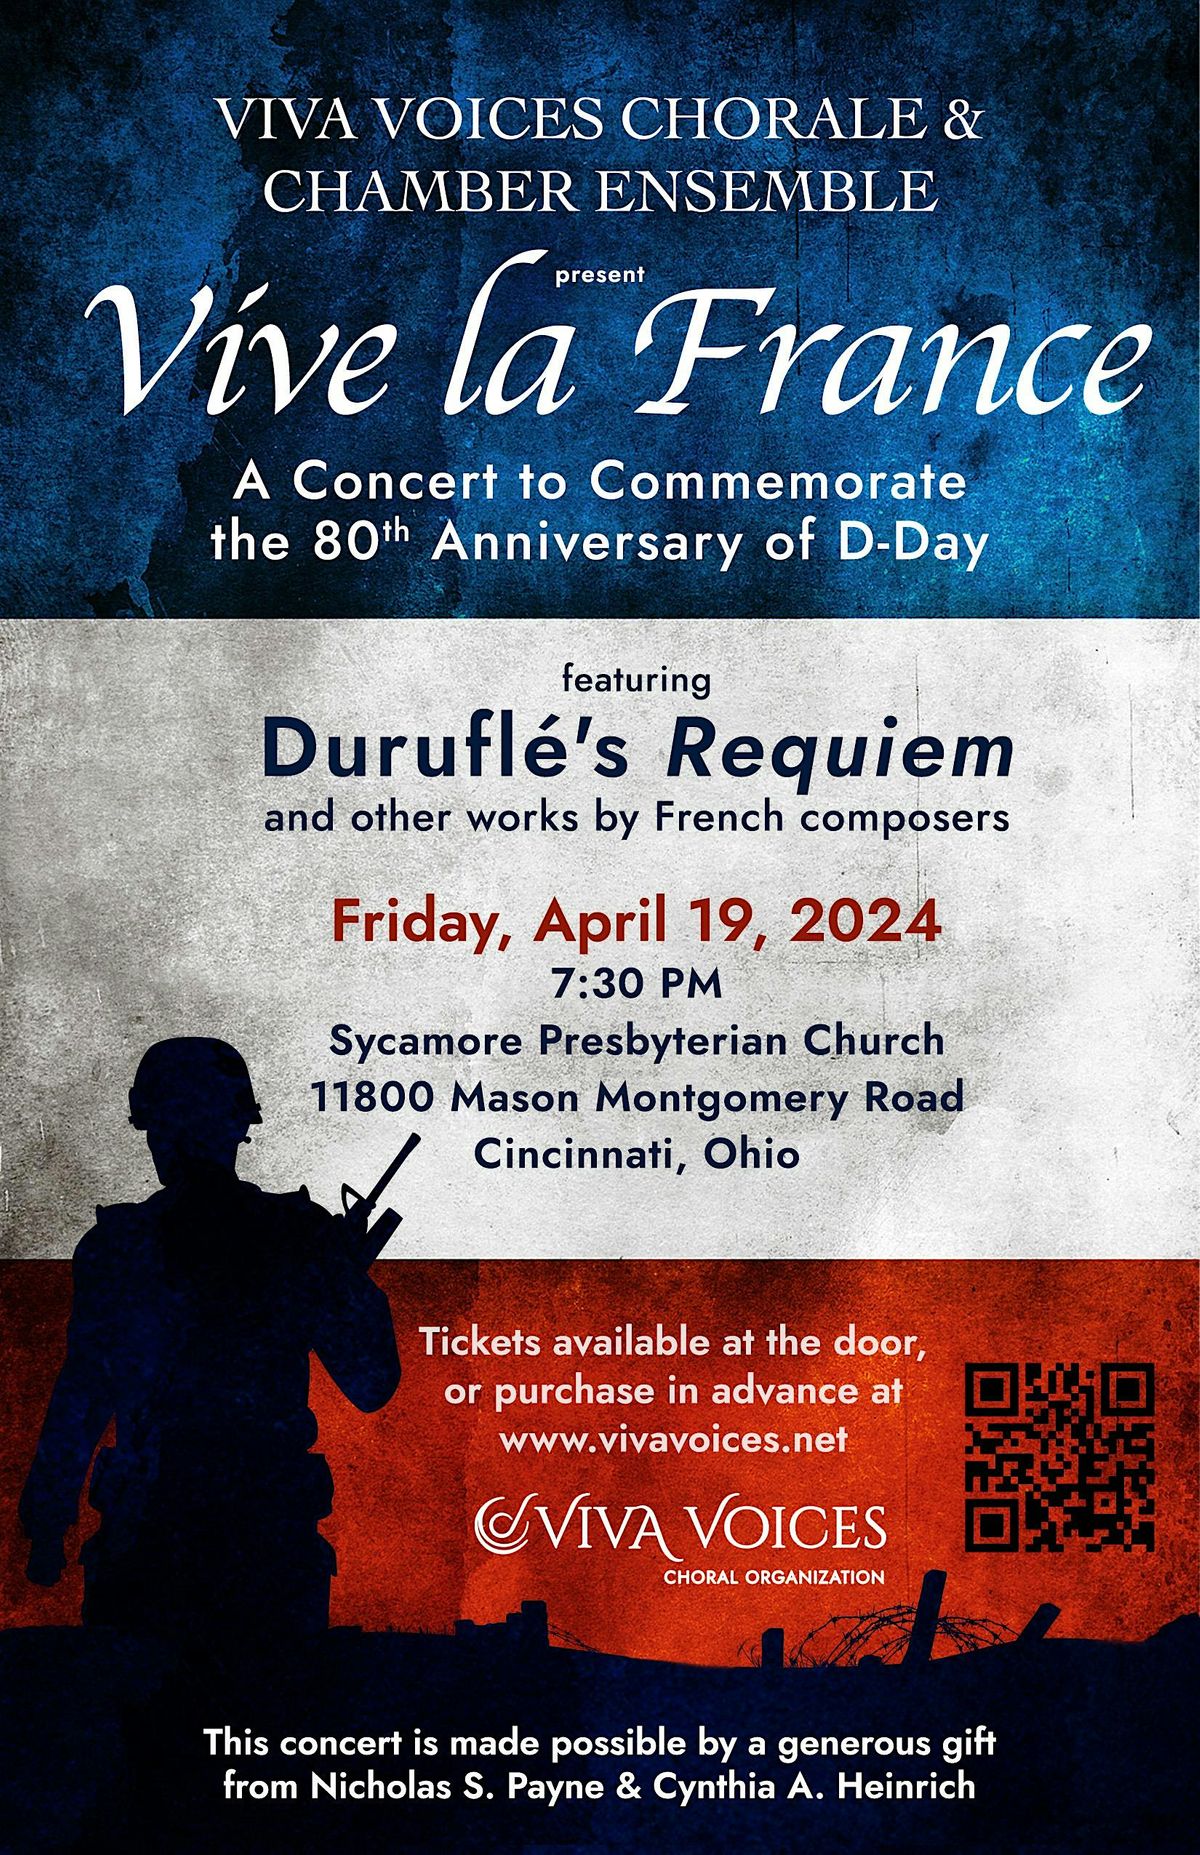 VIVE LA FRANCE: A Concert to Commemorate the 80th Anniversary of D-Day